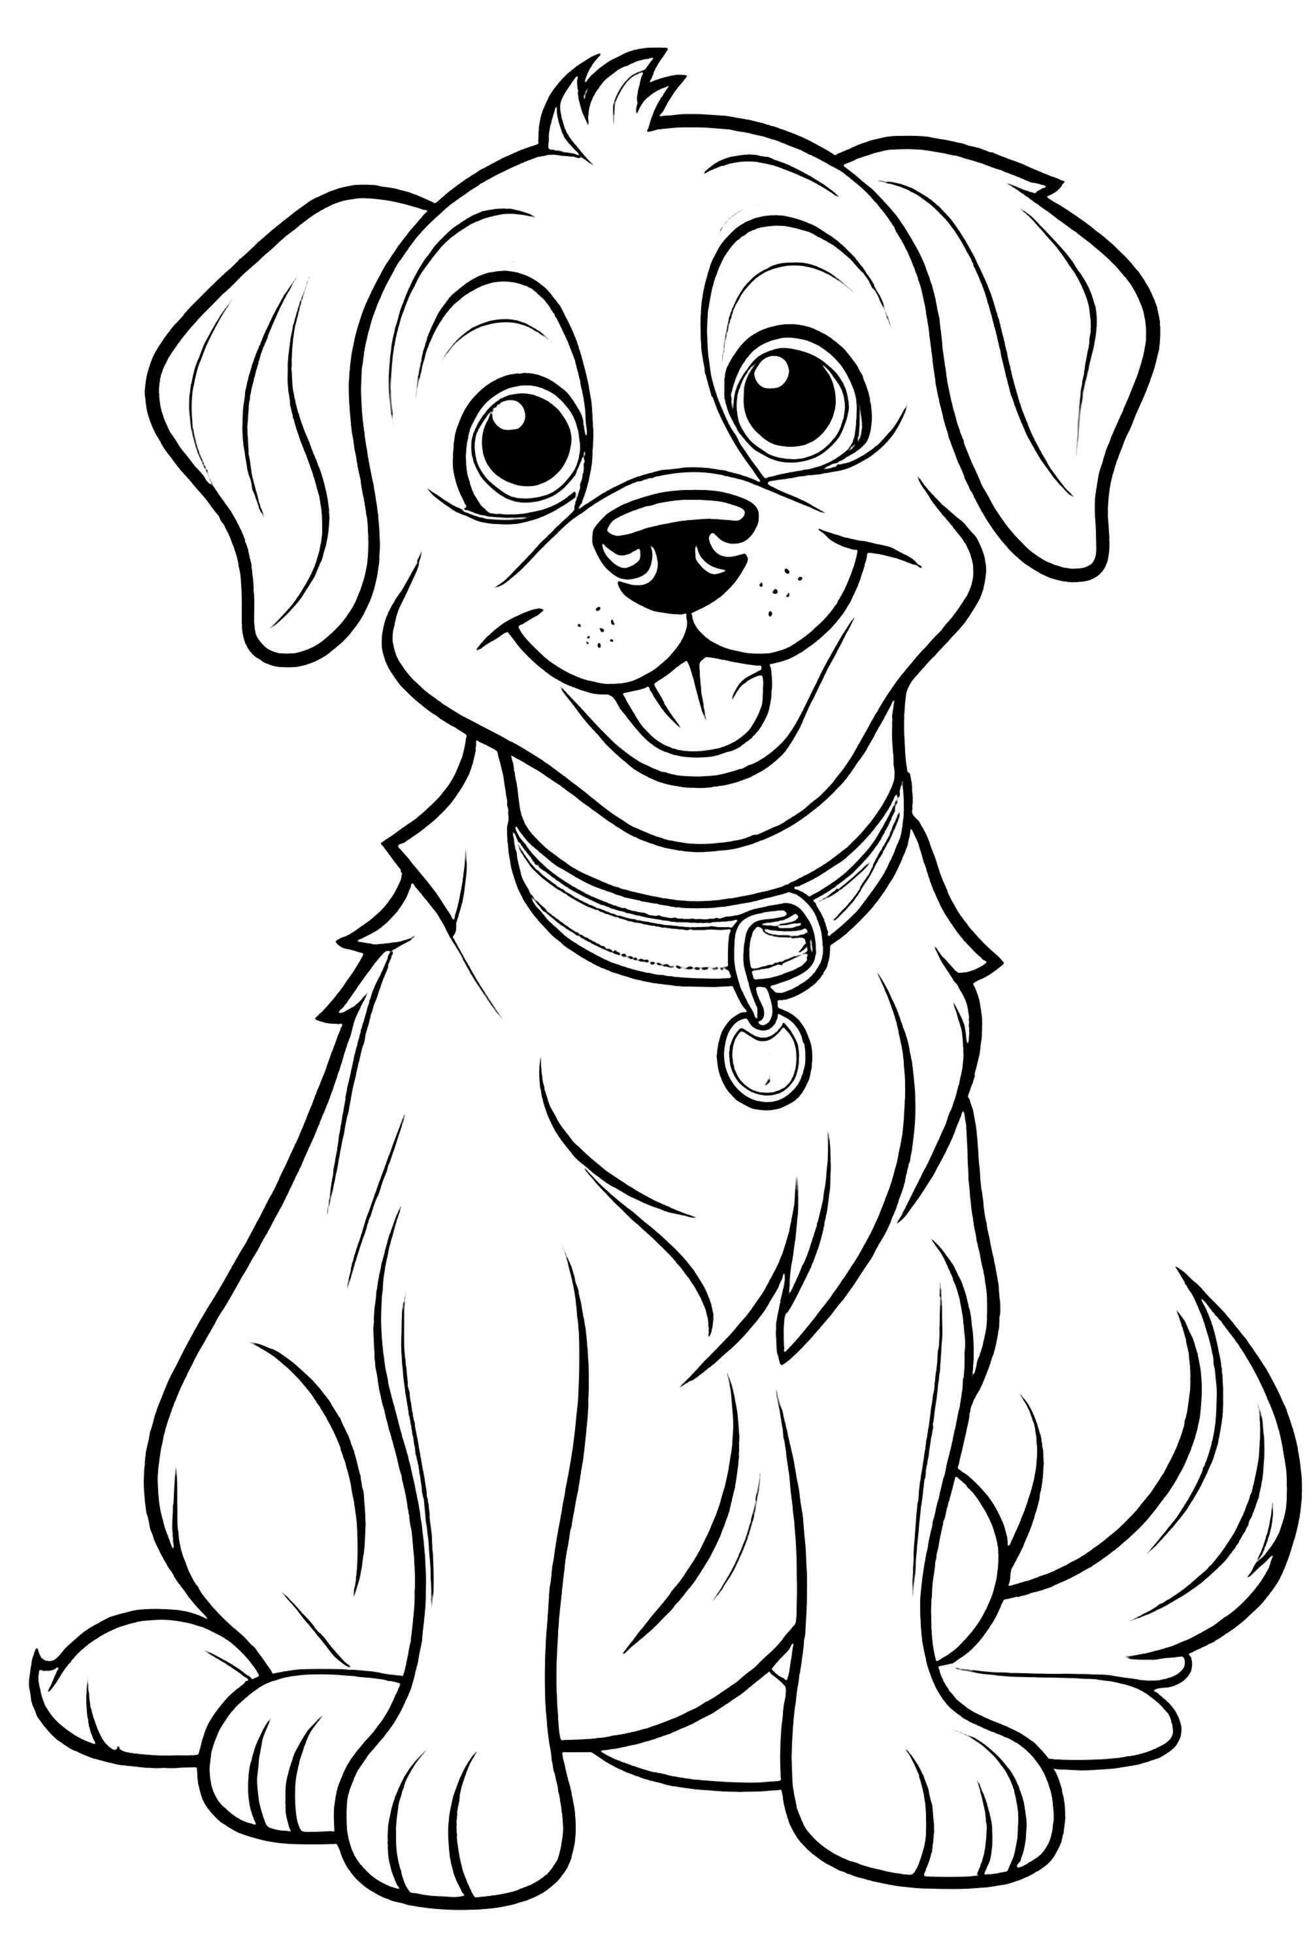 Coloring page outline of Kids Coloring Page 27986256 Stock Photo at ...